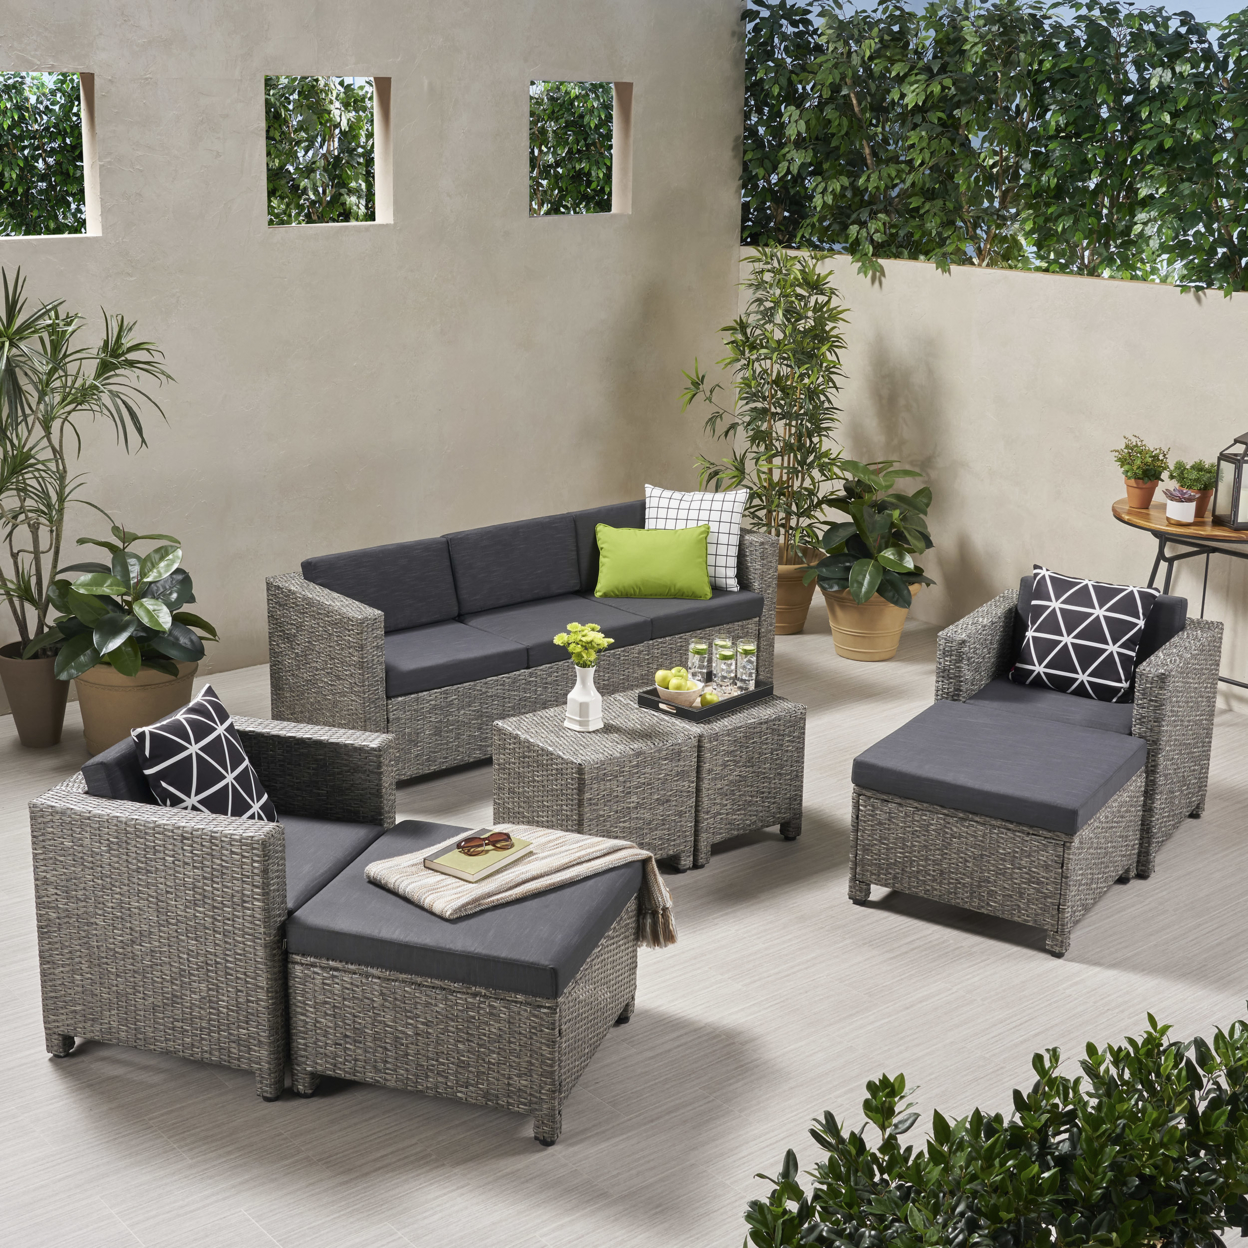 Bonnie Outdoor 5 Seater Wicker Sofa Chat Set With Ottomans - Mix Black + Dark Gray